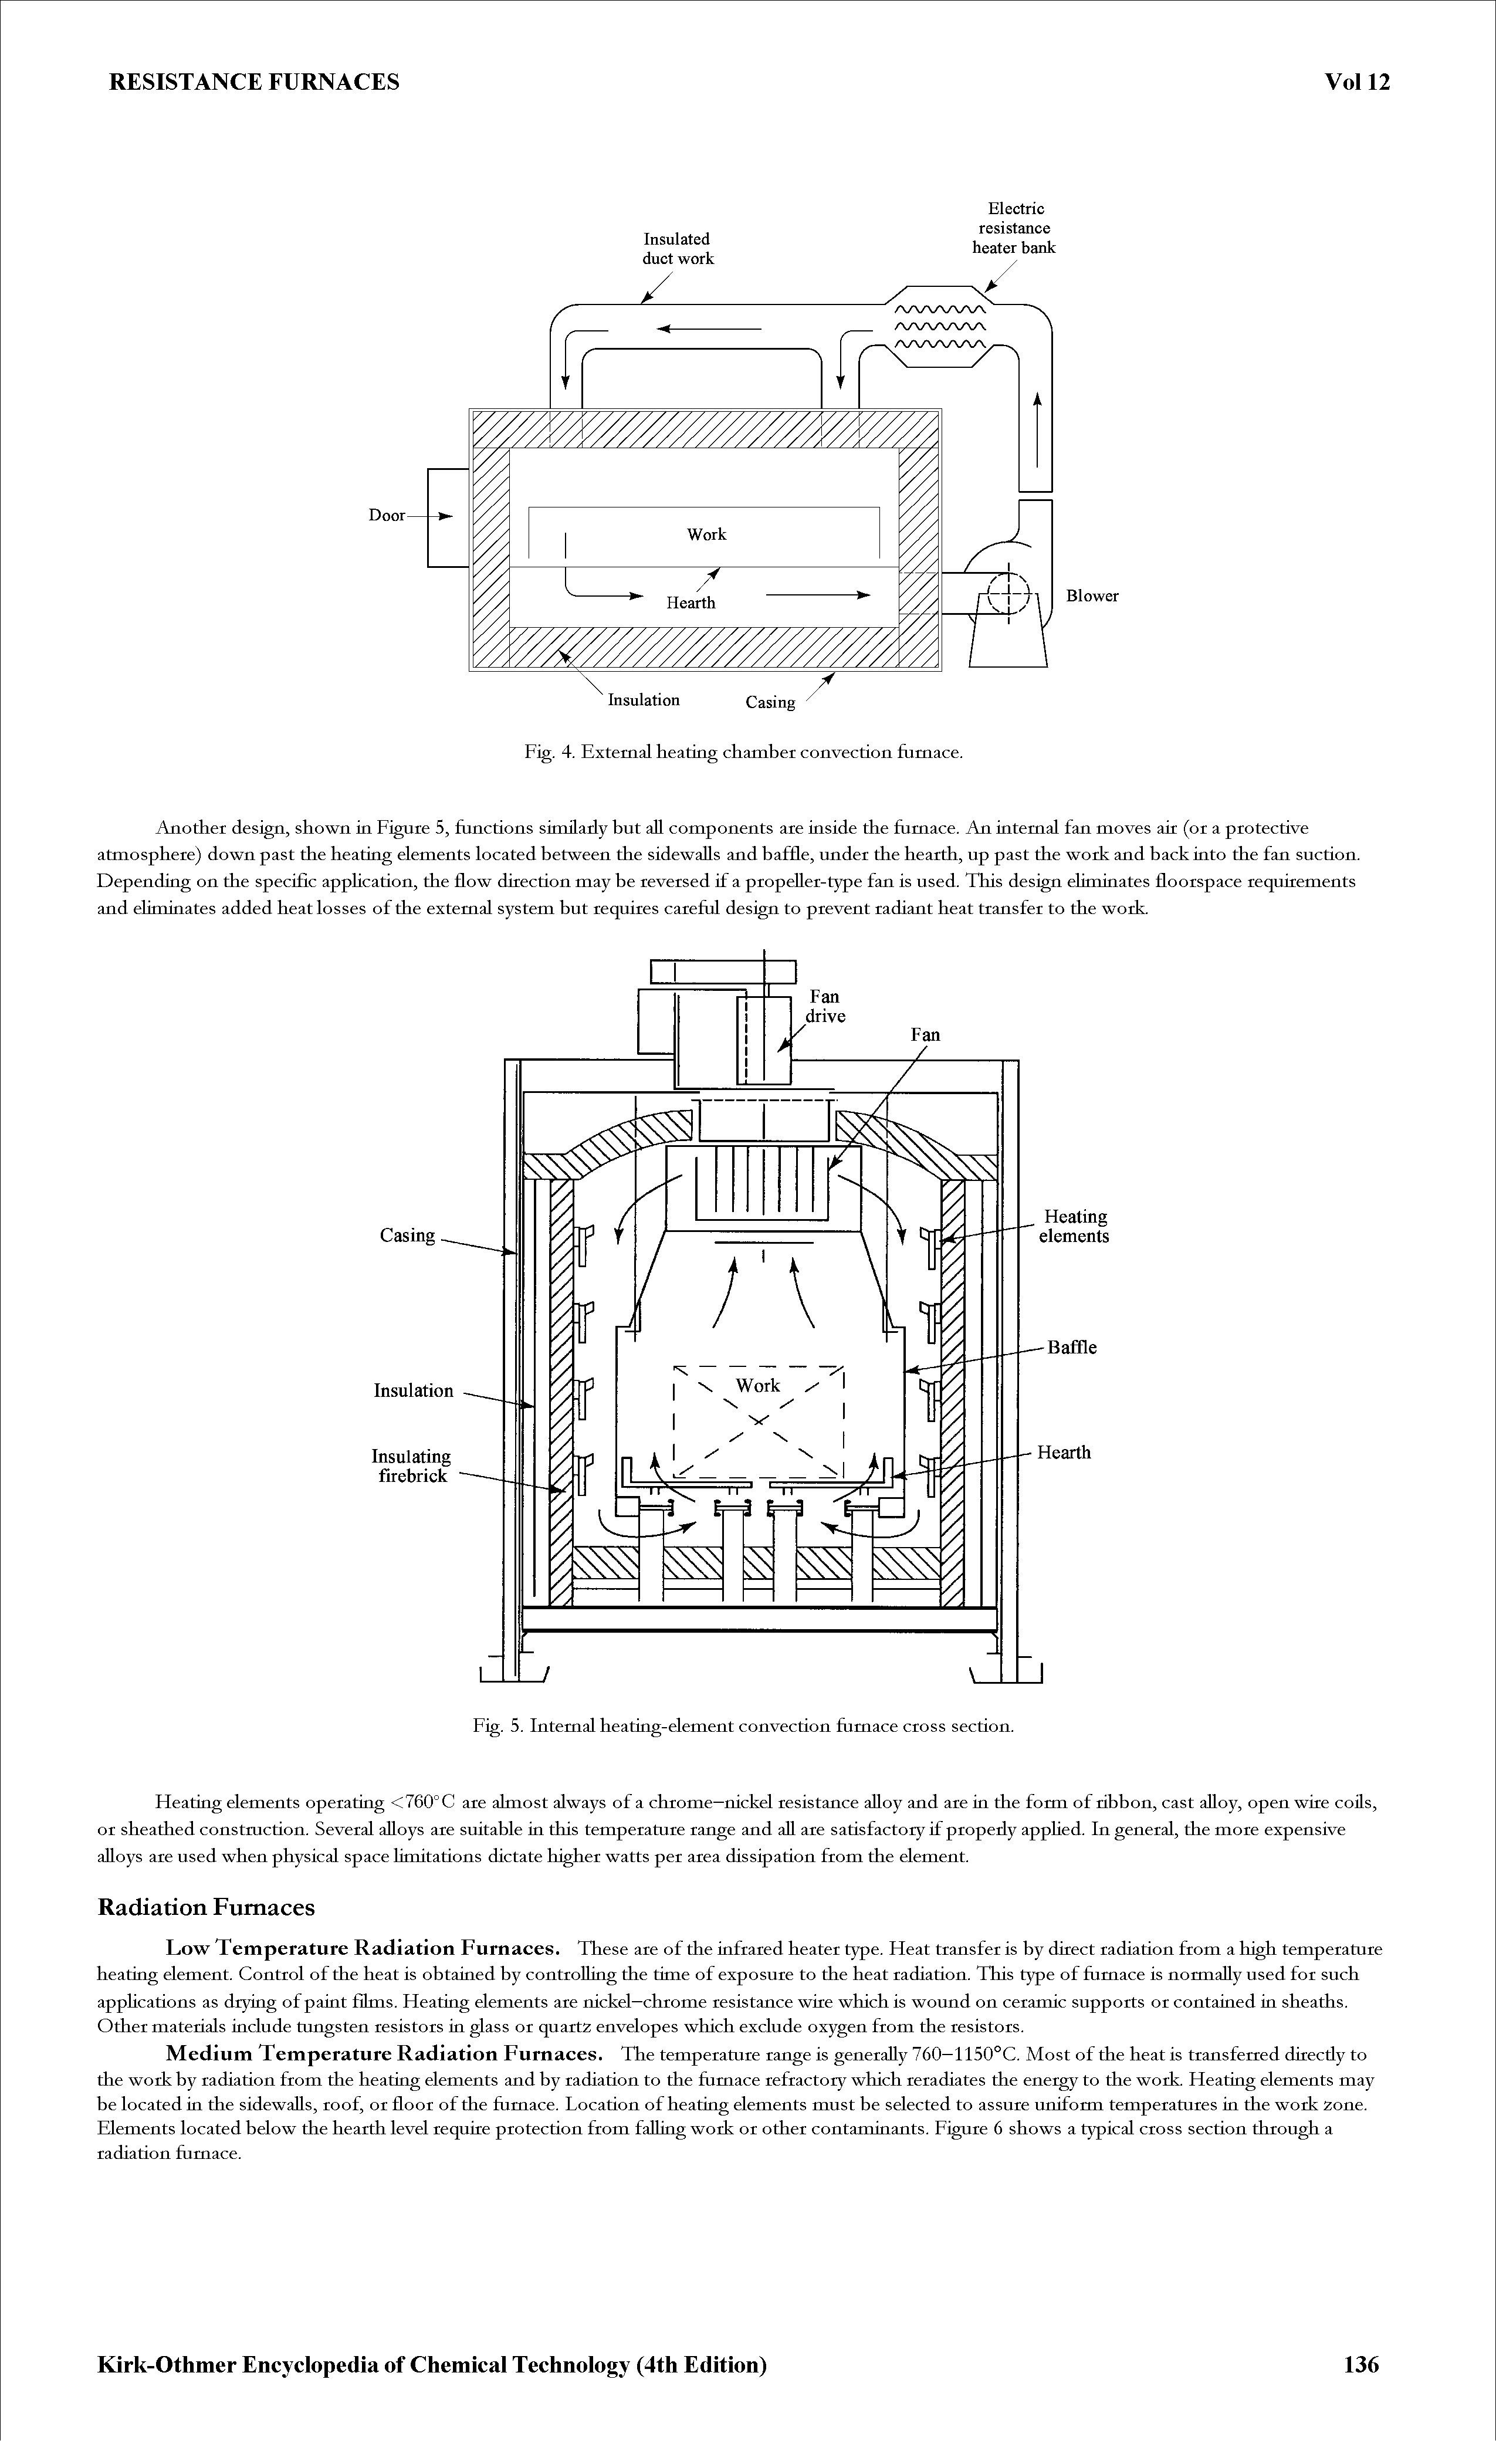 Fig. 5. Internal heating-element convection furnace cross section.